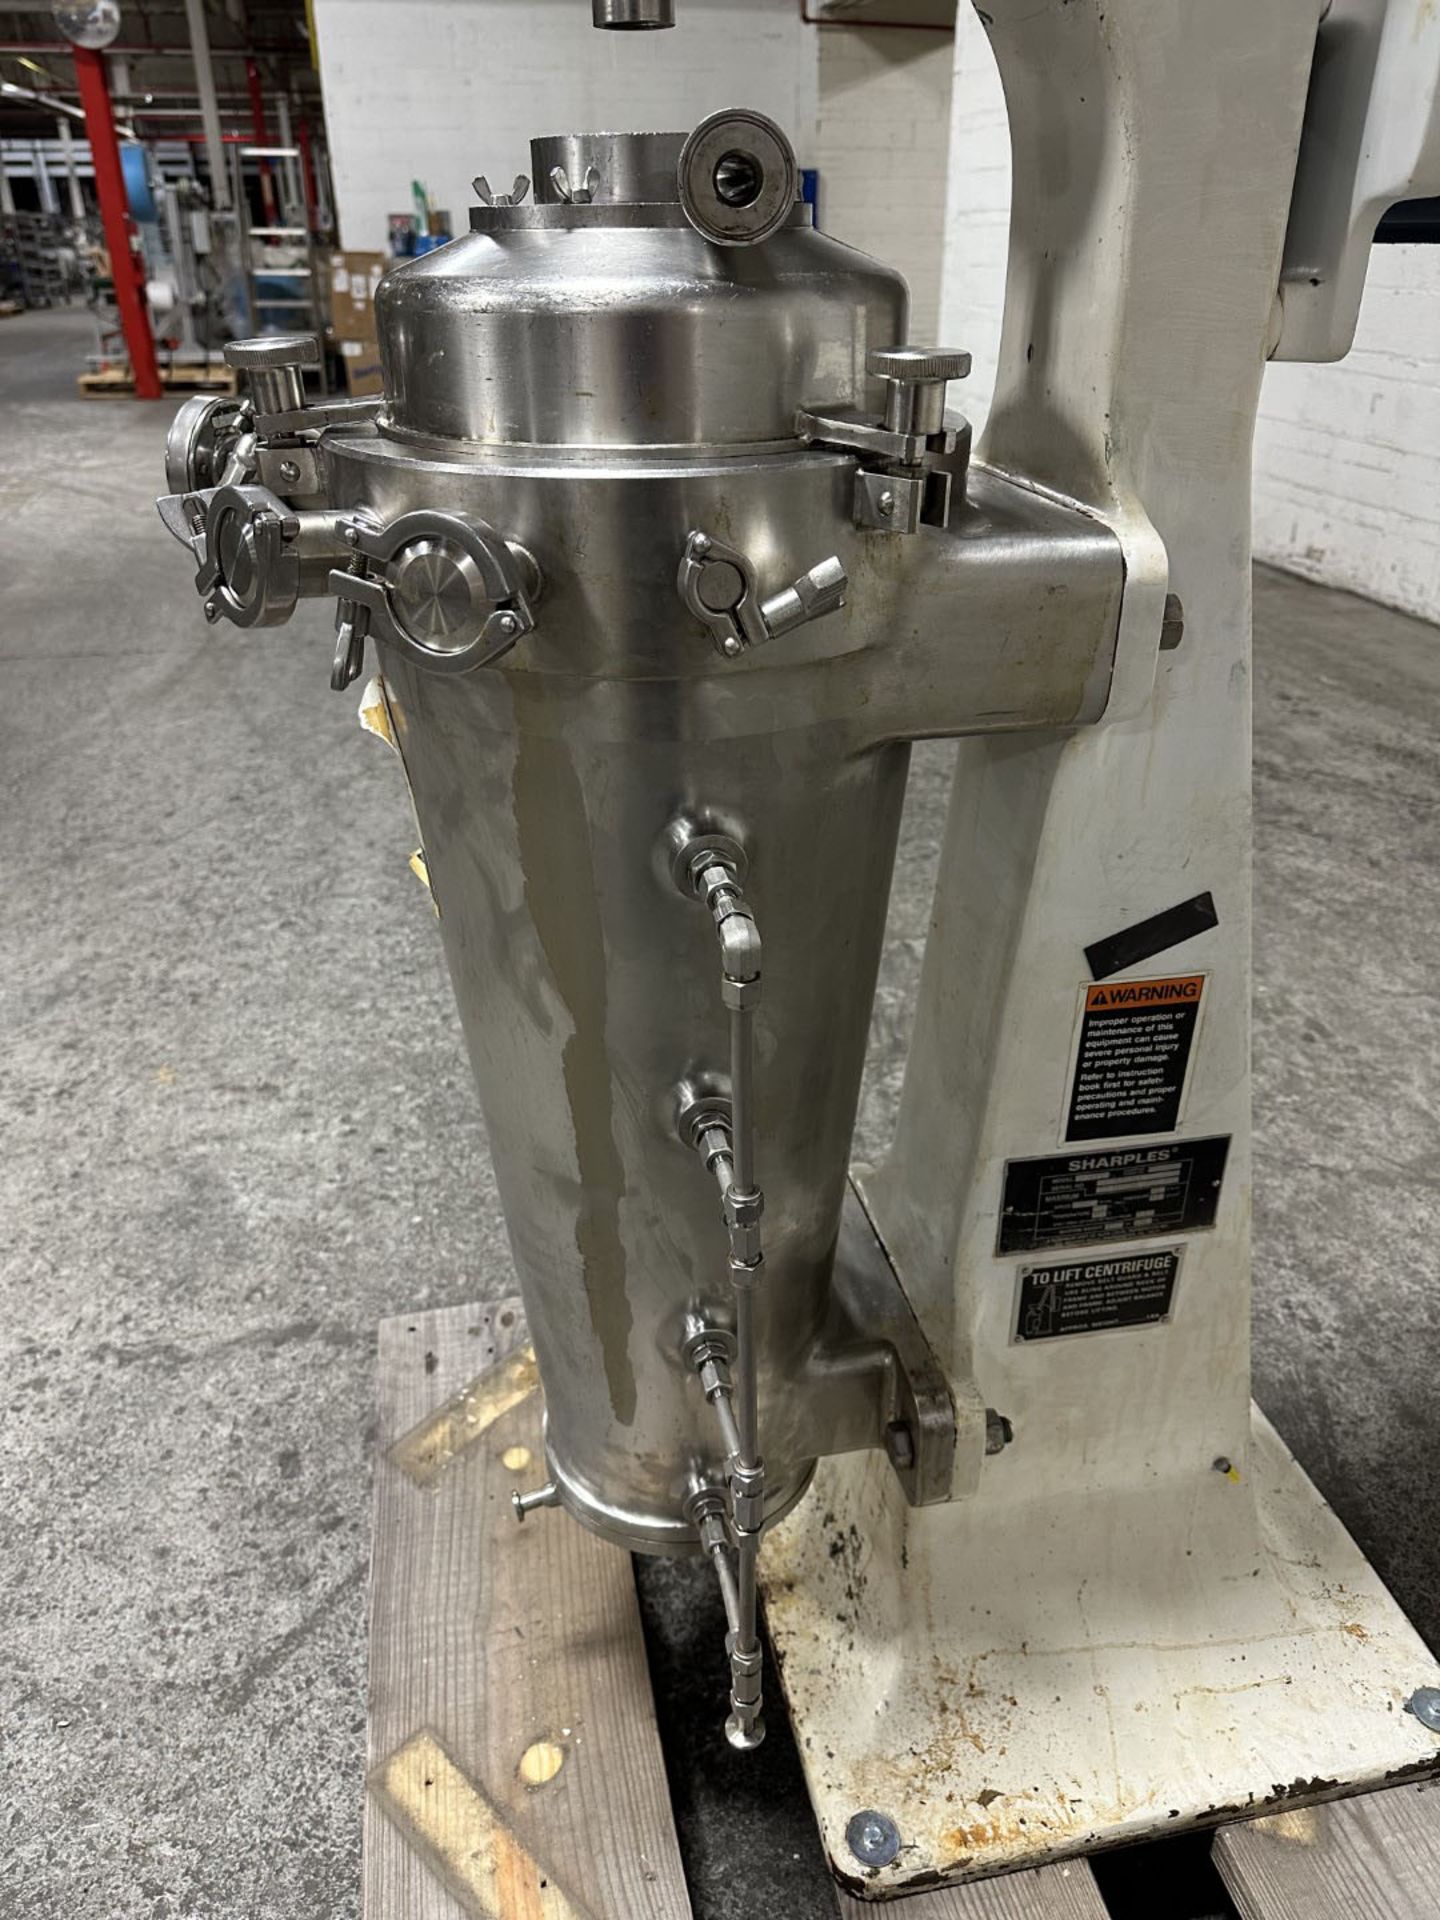 Sharples vaporite super centrifuge, model AS16VB, stainless steel construction, 17000 RPM max speed, - Image 8 of 20